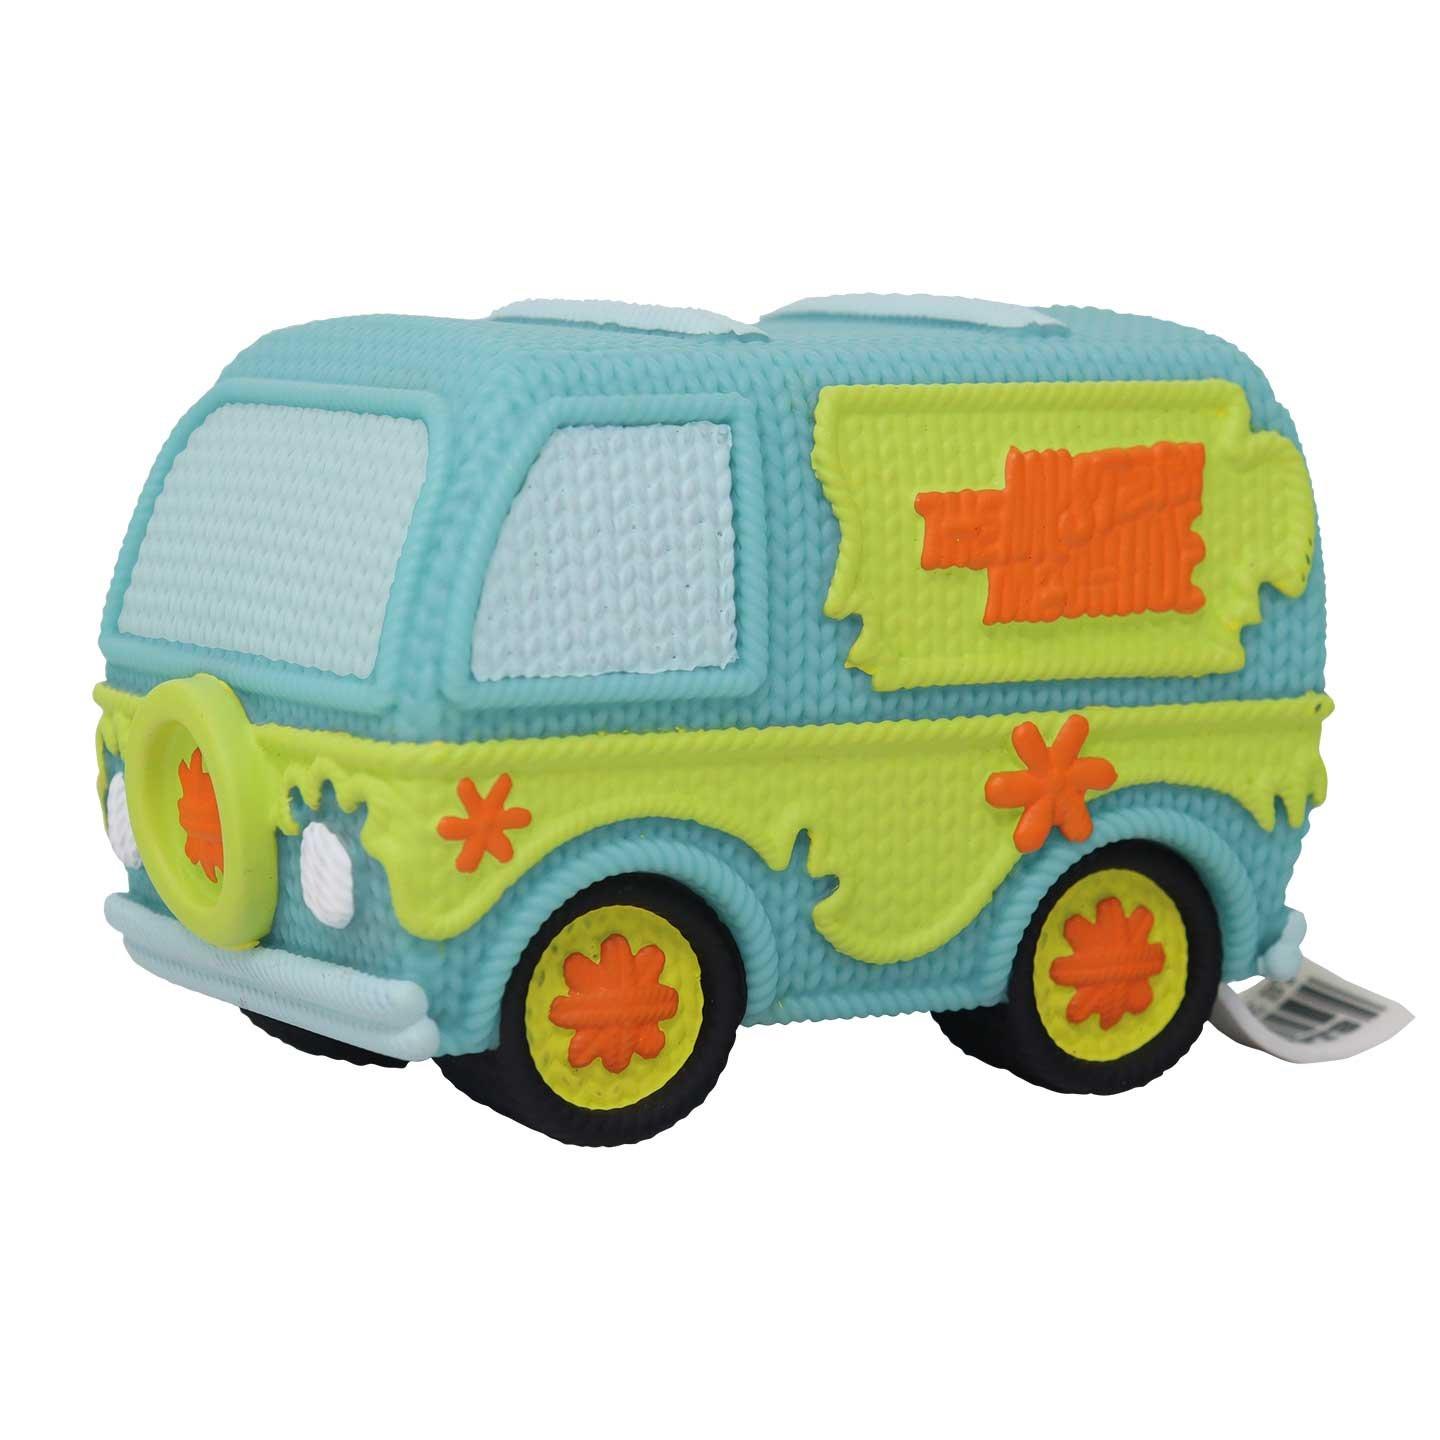 The Mystery Machine Vinyl Figure from Handmade By Robots